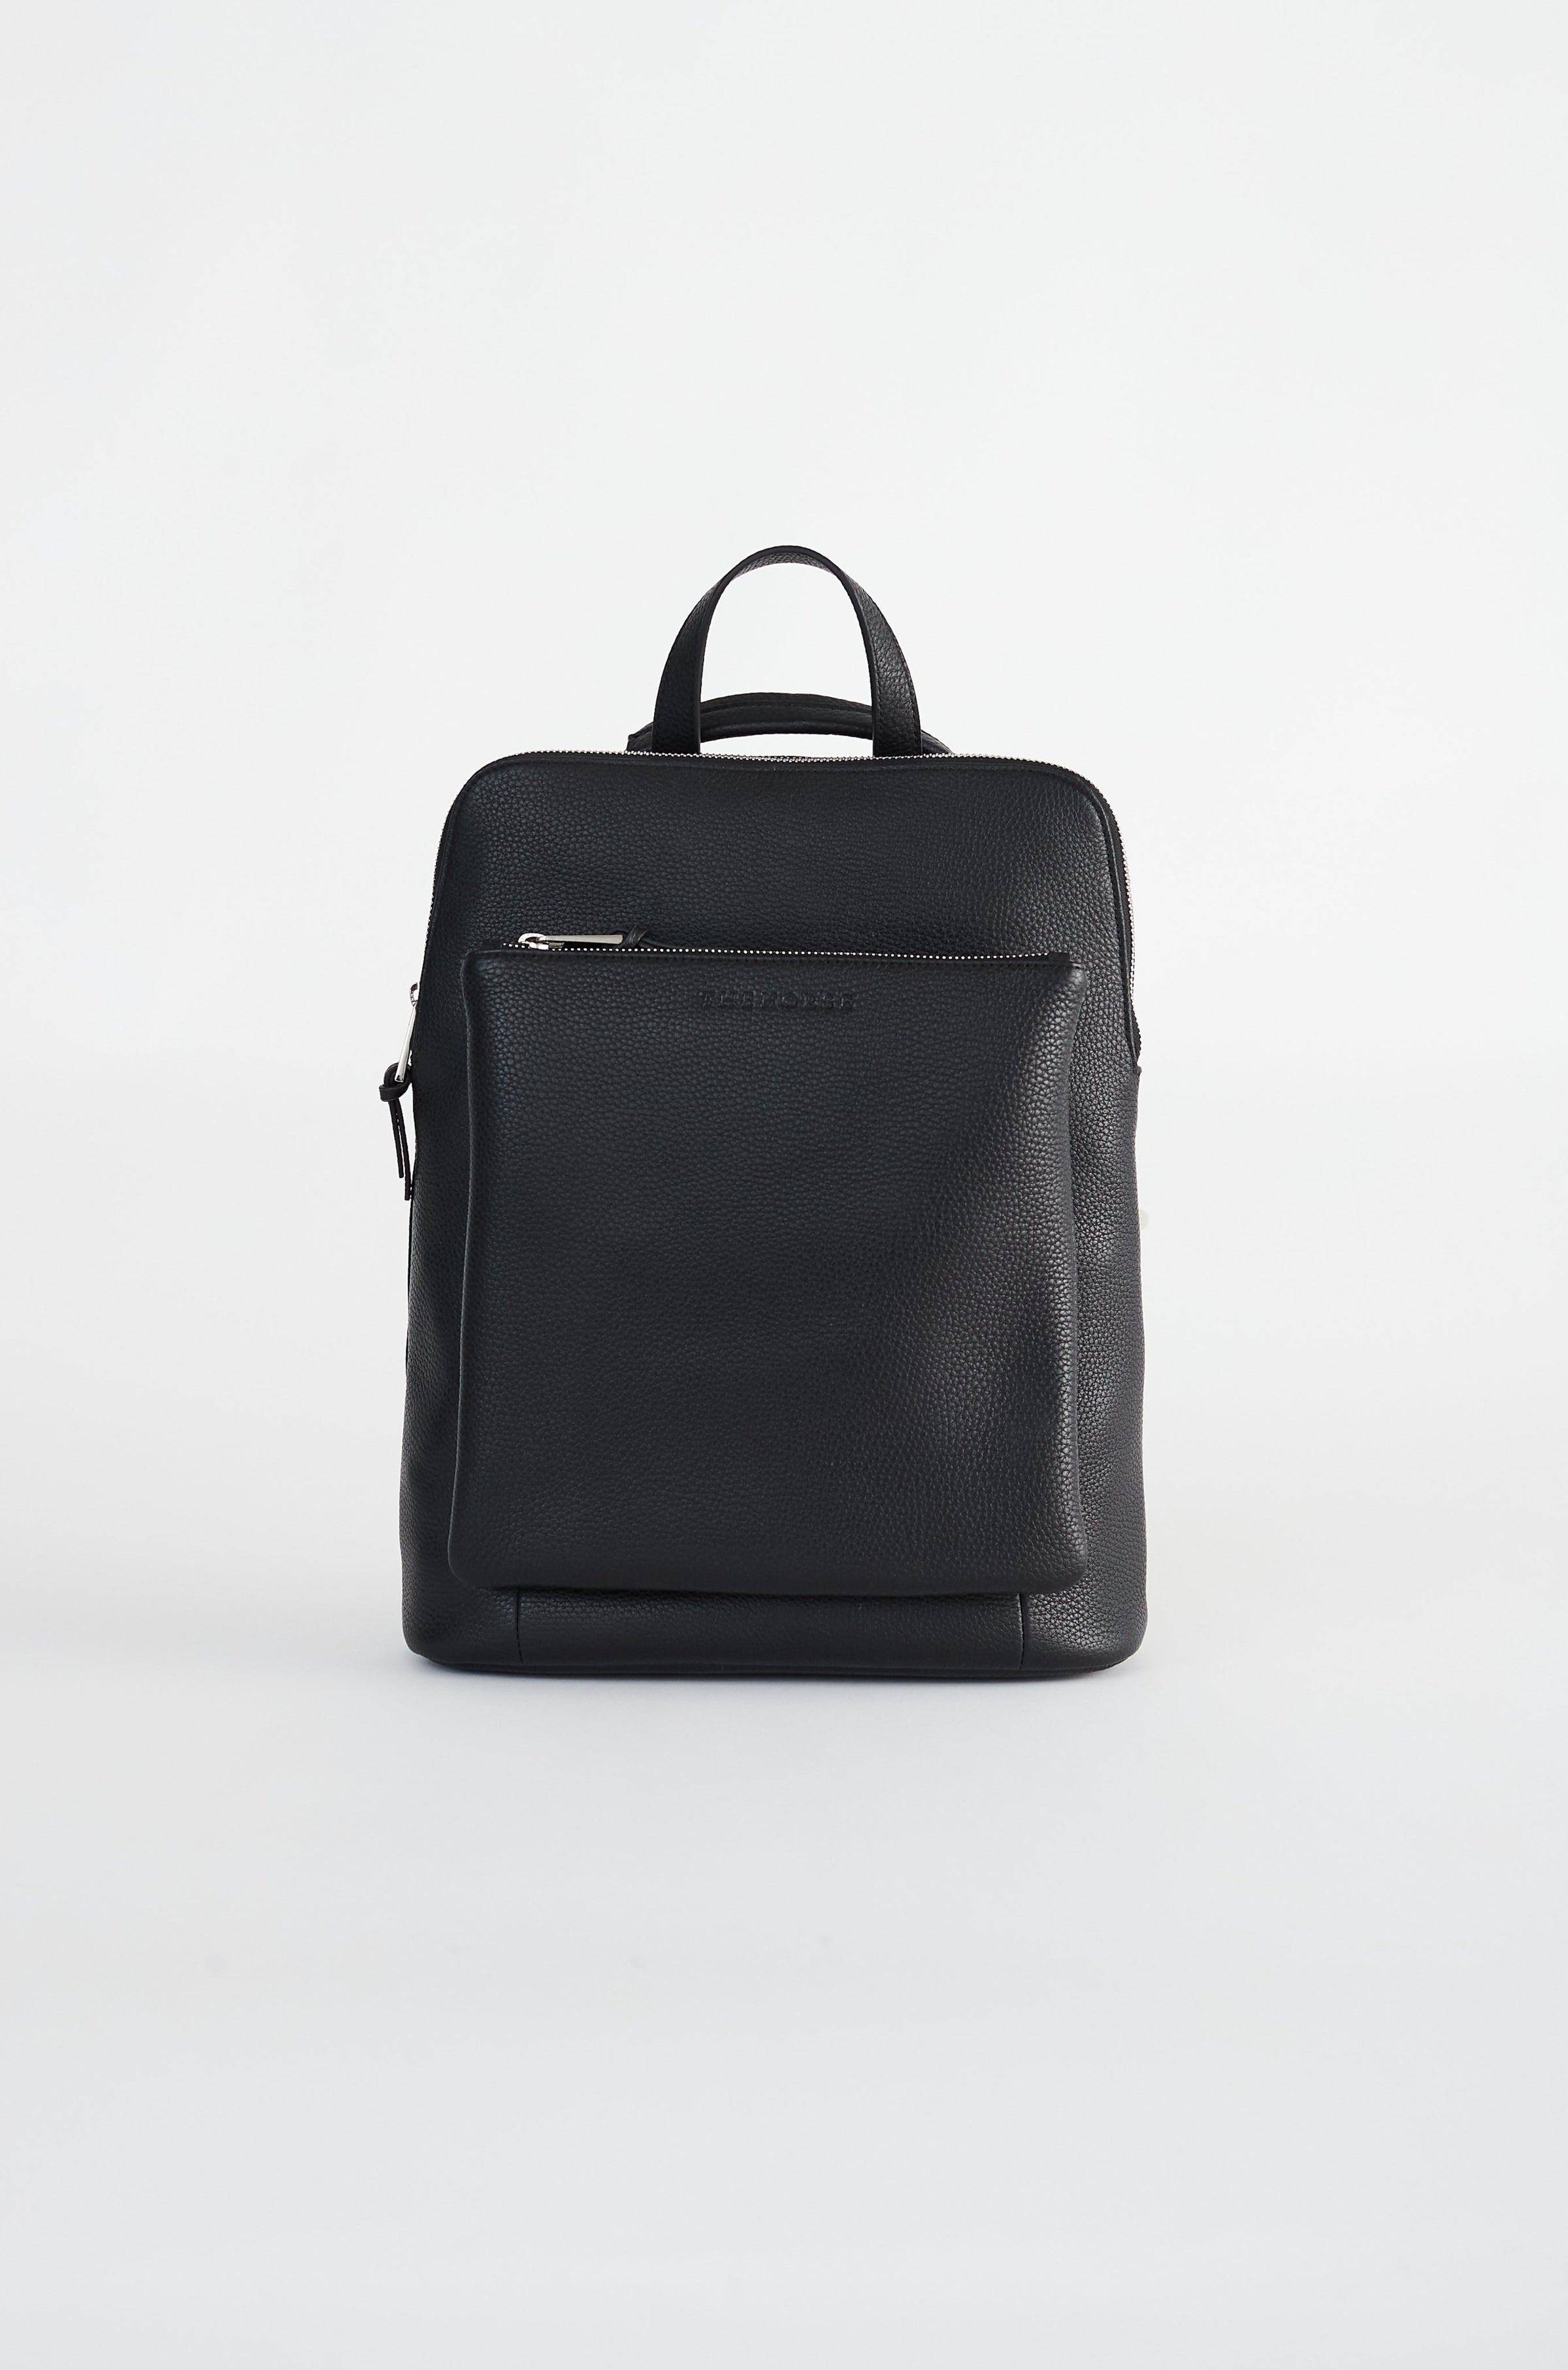 Backpack in Black Leather by The Horse®